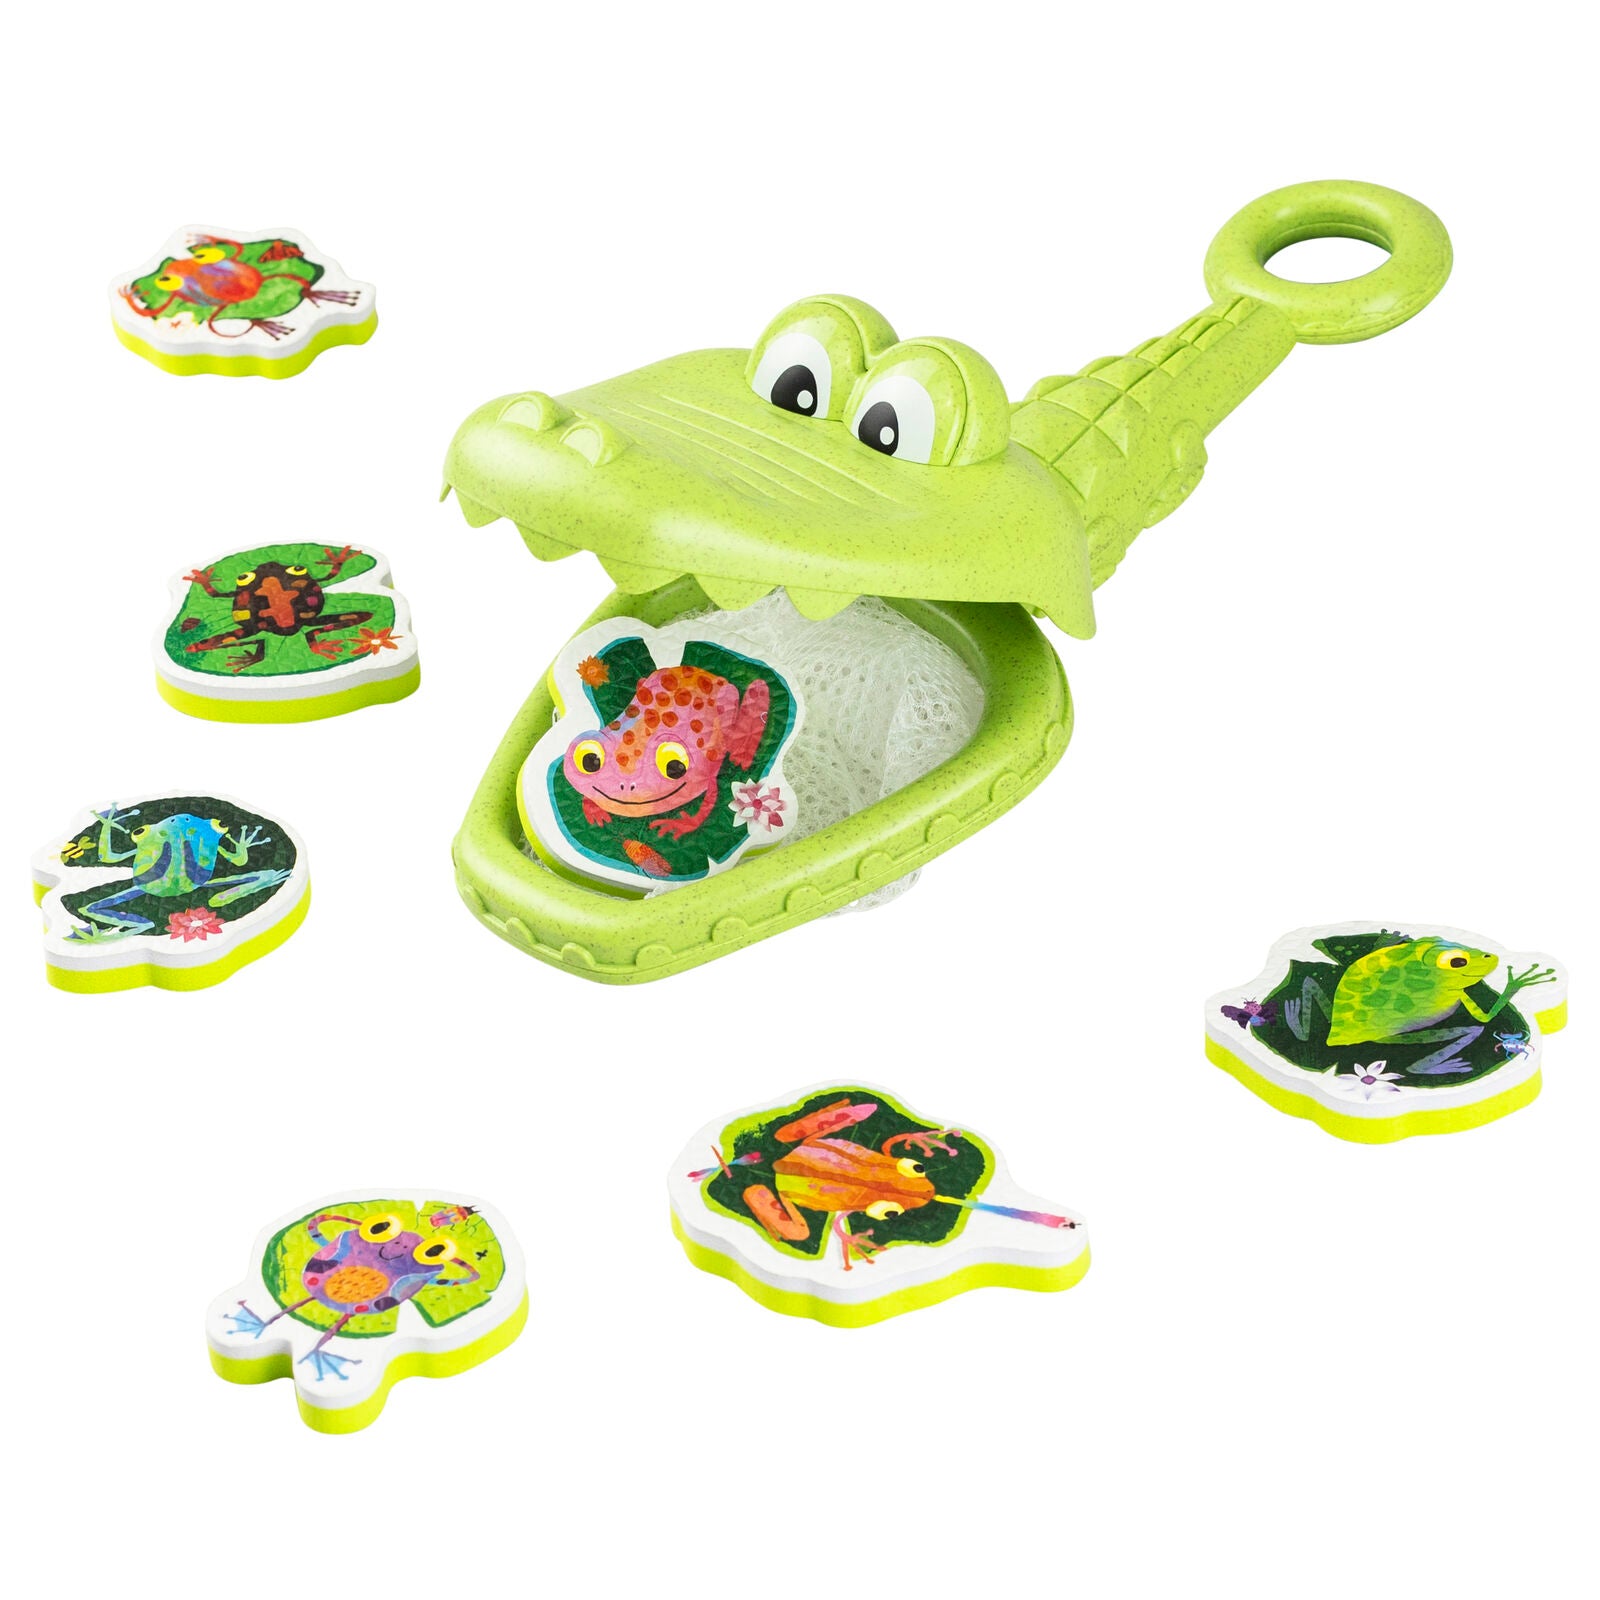 Tiger Tribe Croc Chasey – Catch A Frog